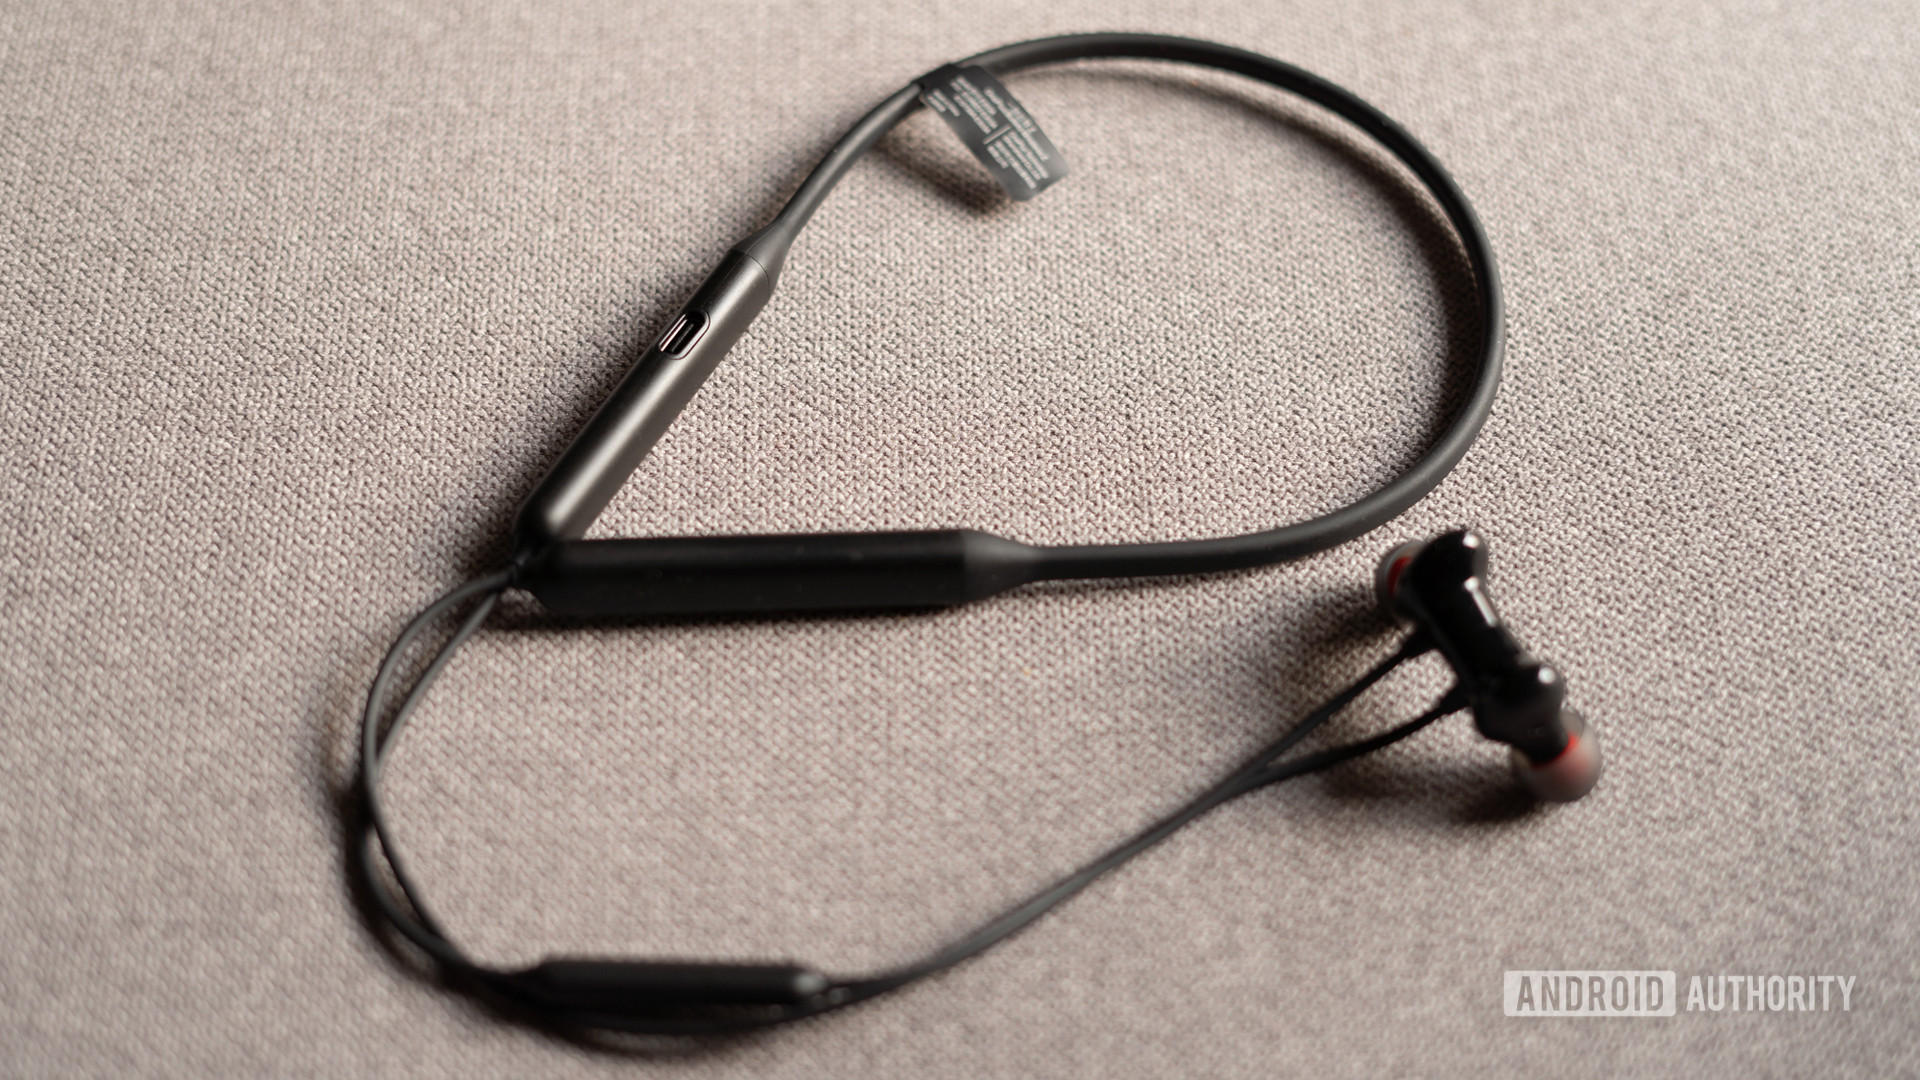 OnePlus Bullets Wireless Z neckband and type c